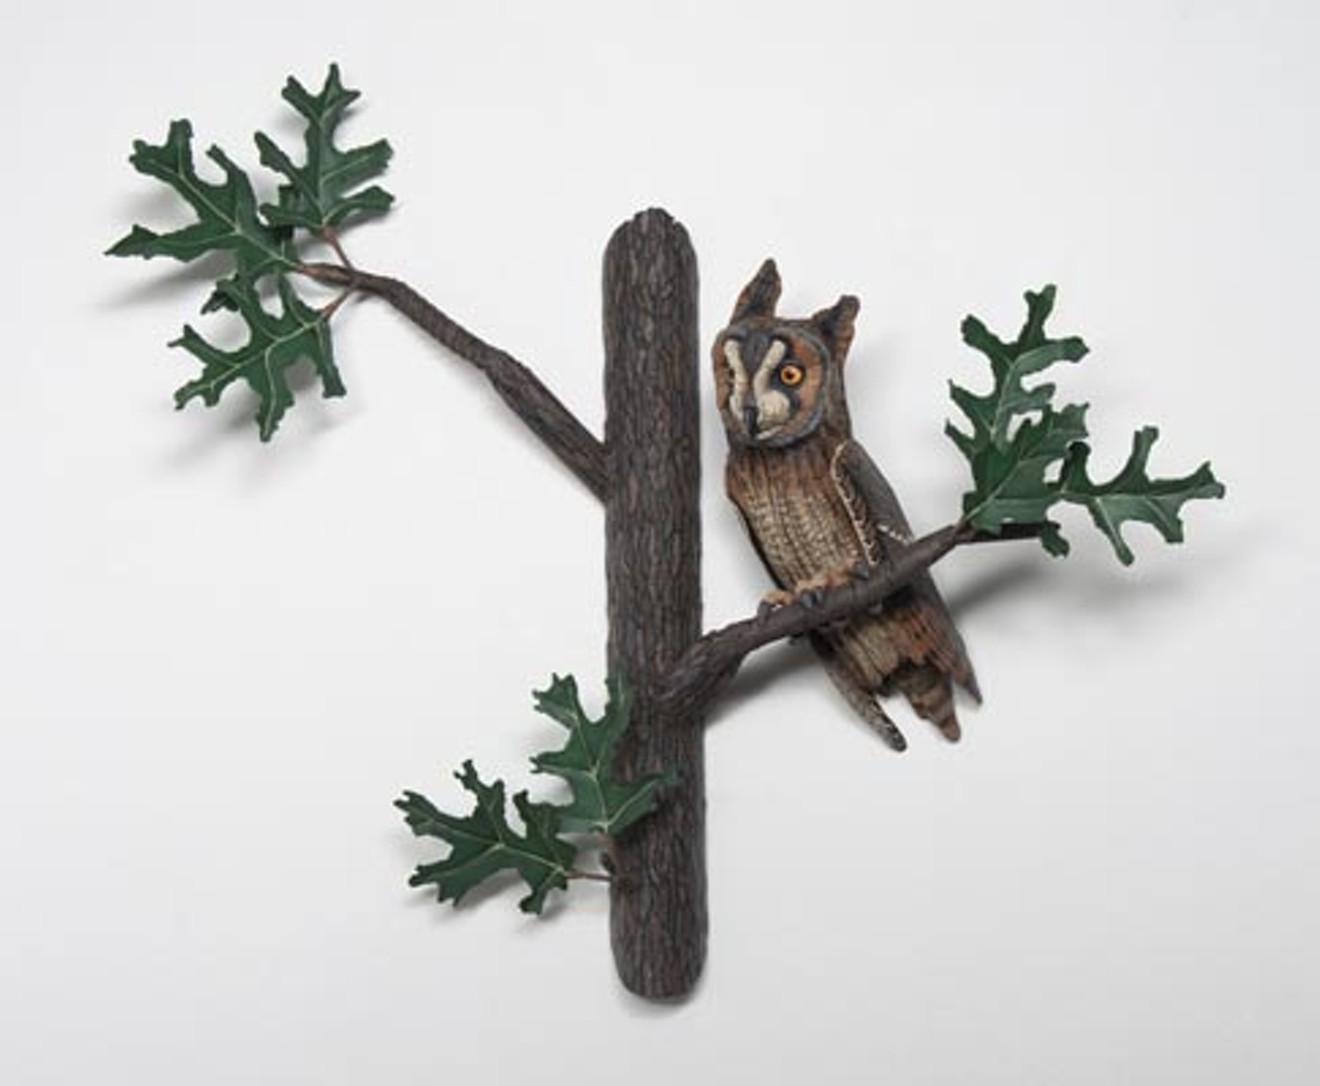 Kathy Boortz's sculptures are made with materials she finds on her walks.